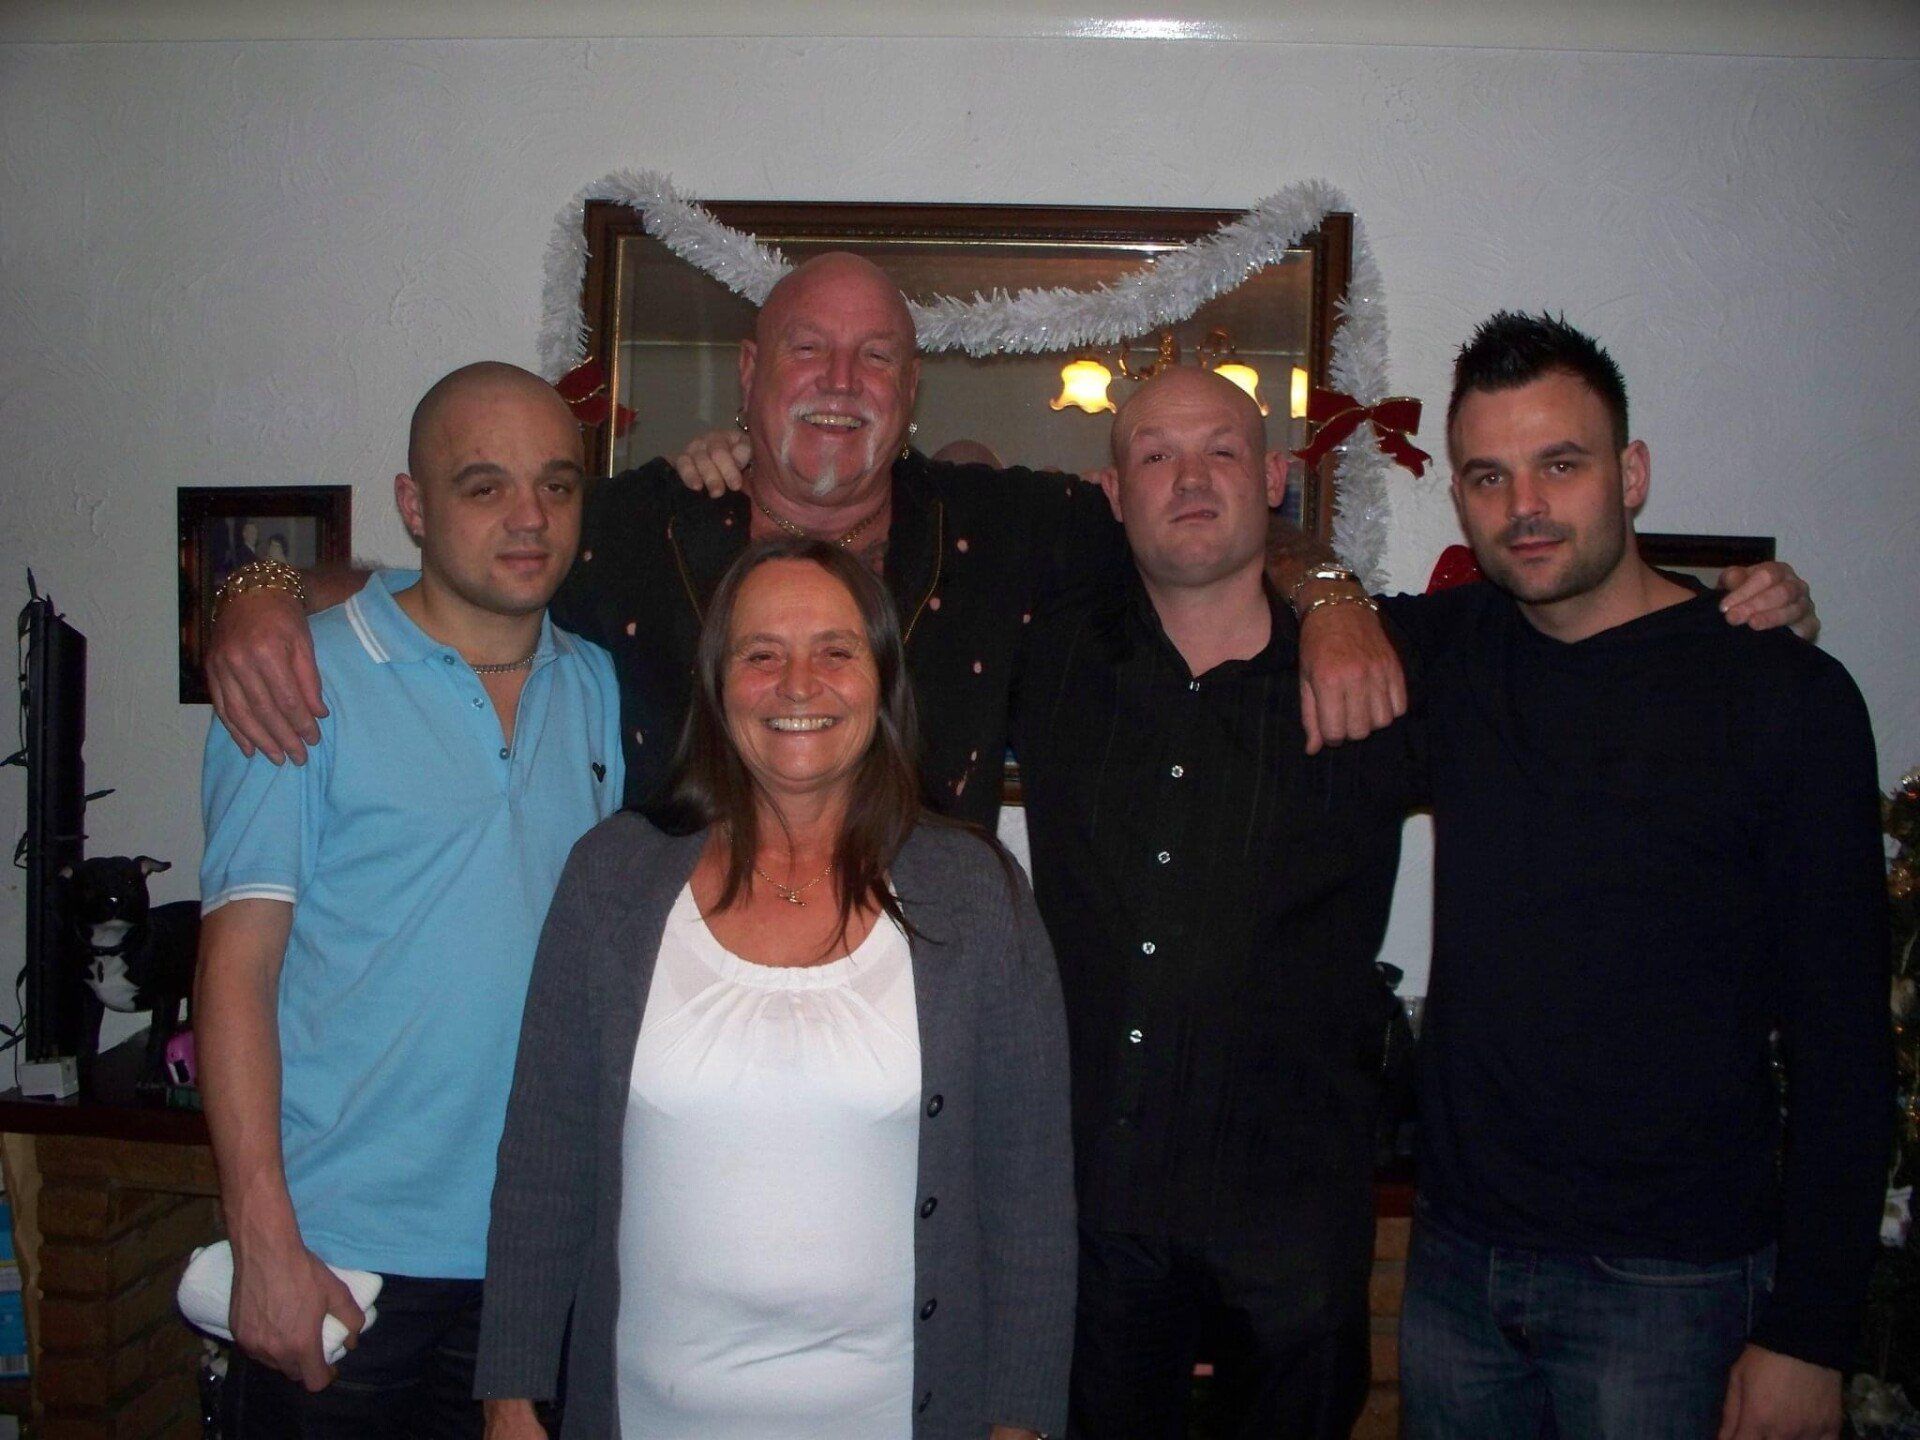 Wayne pugh with mum dad and two brothers-my family is my strength